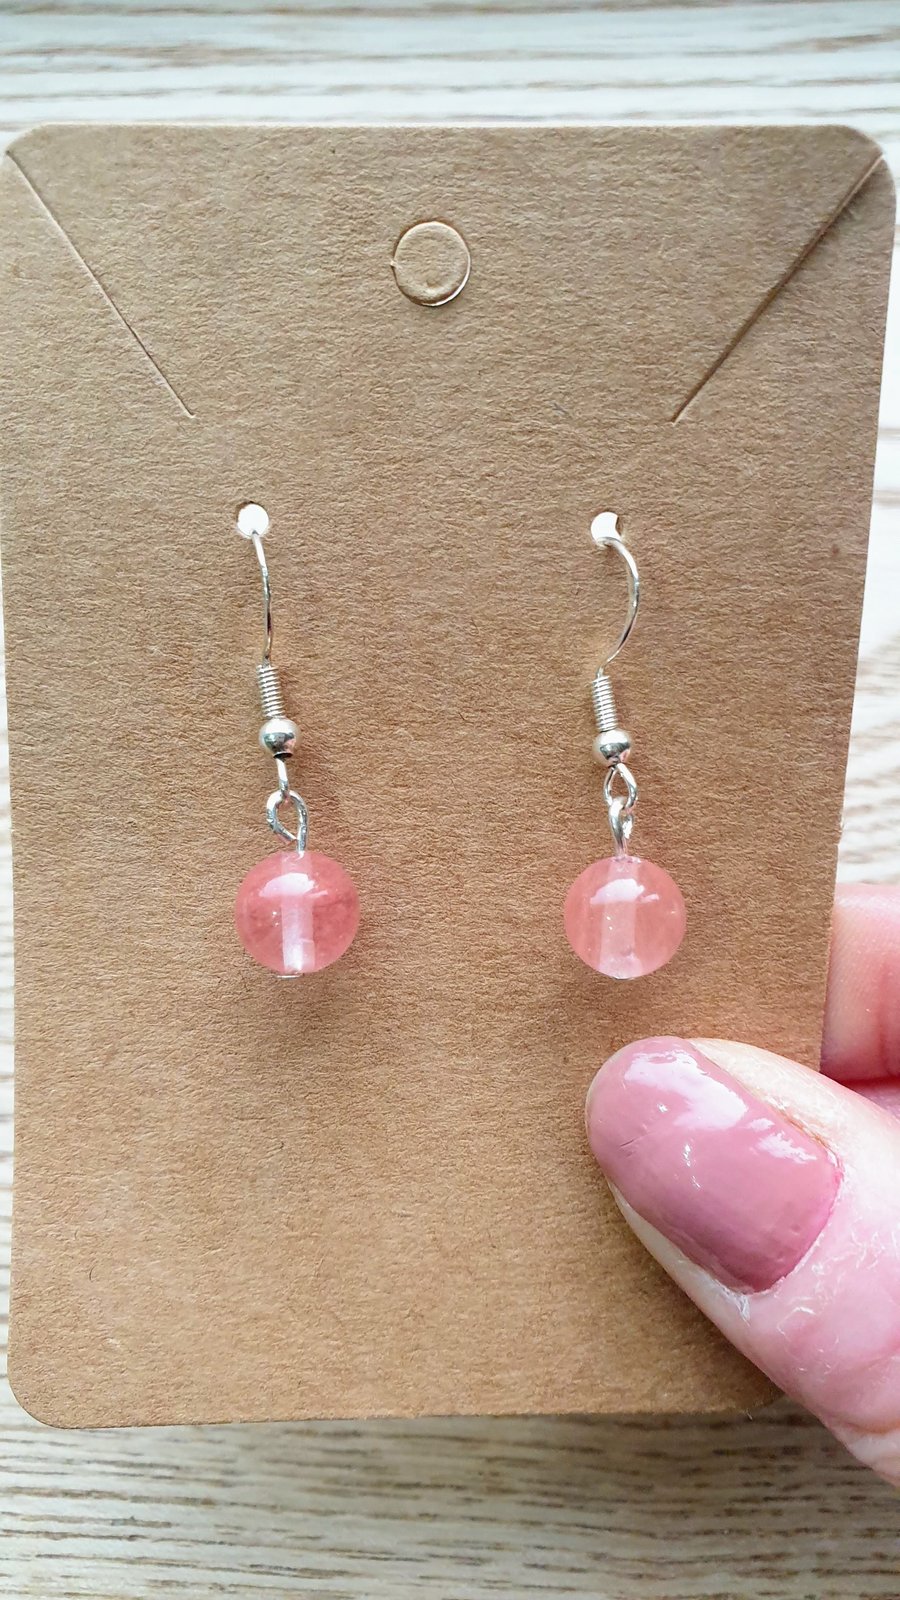 Cherry Quartz Gemstone Earrings on 925 Silver-Plated Ear Wires